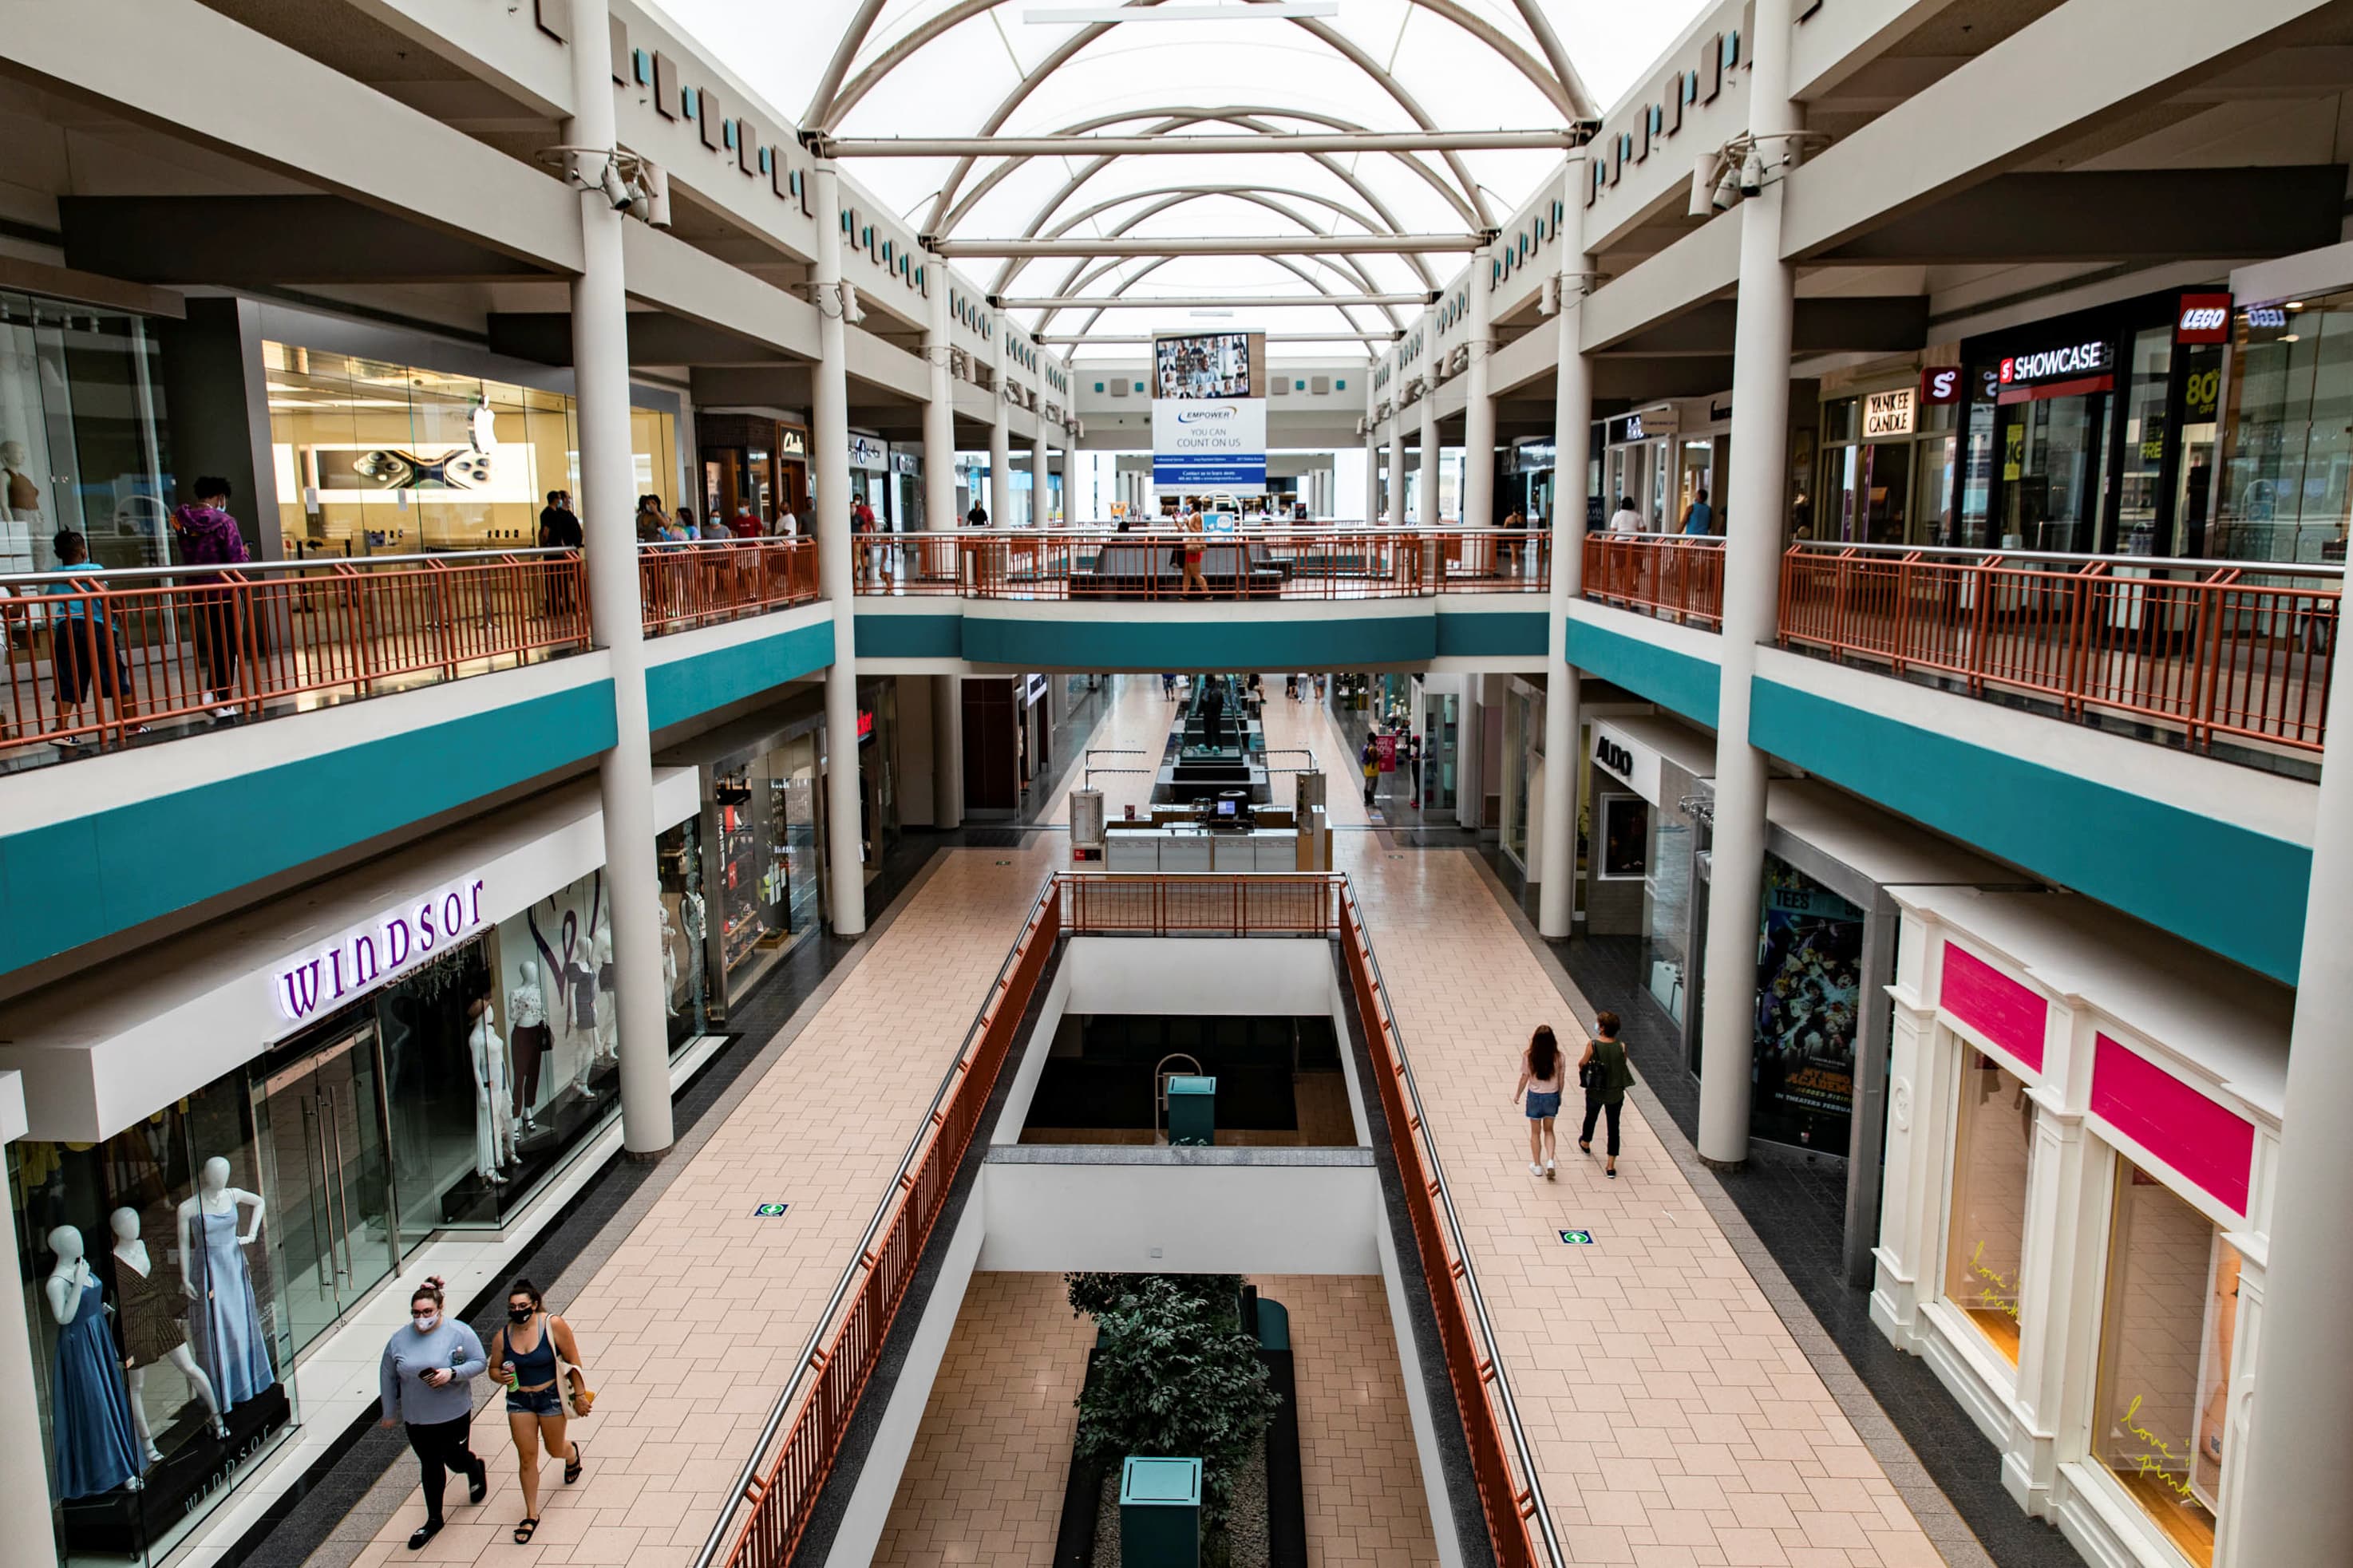 Retail Malls Look For New Innovations, Commerce And Otherwise 